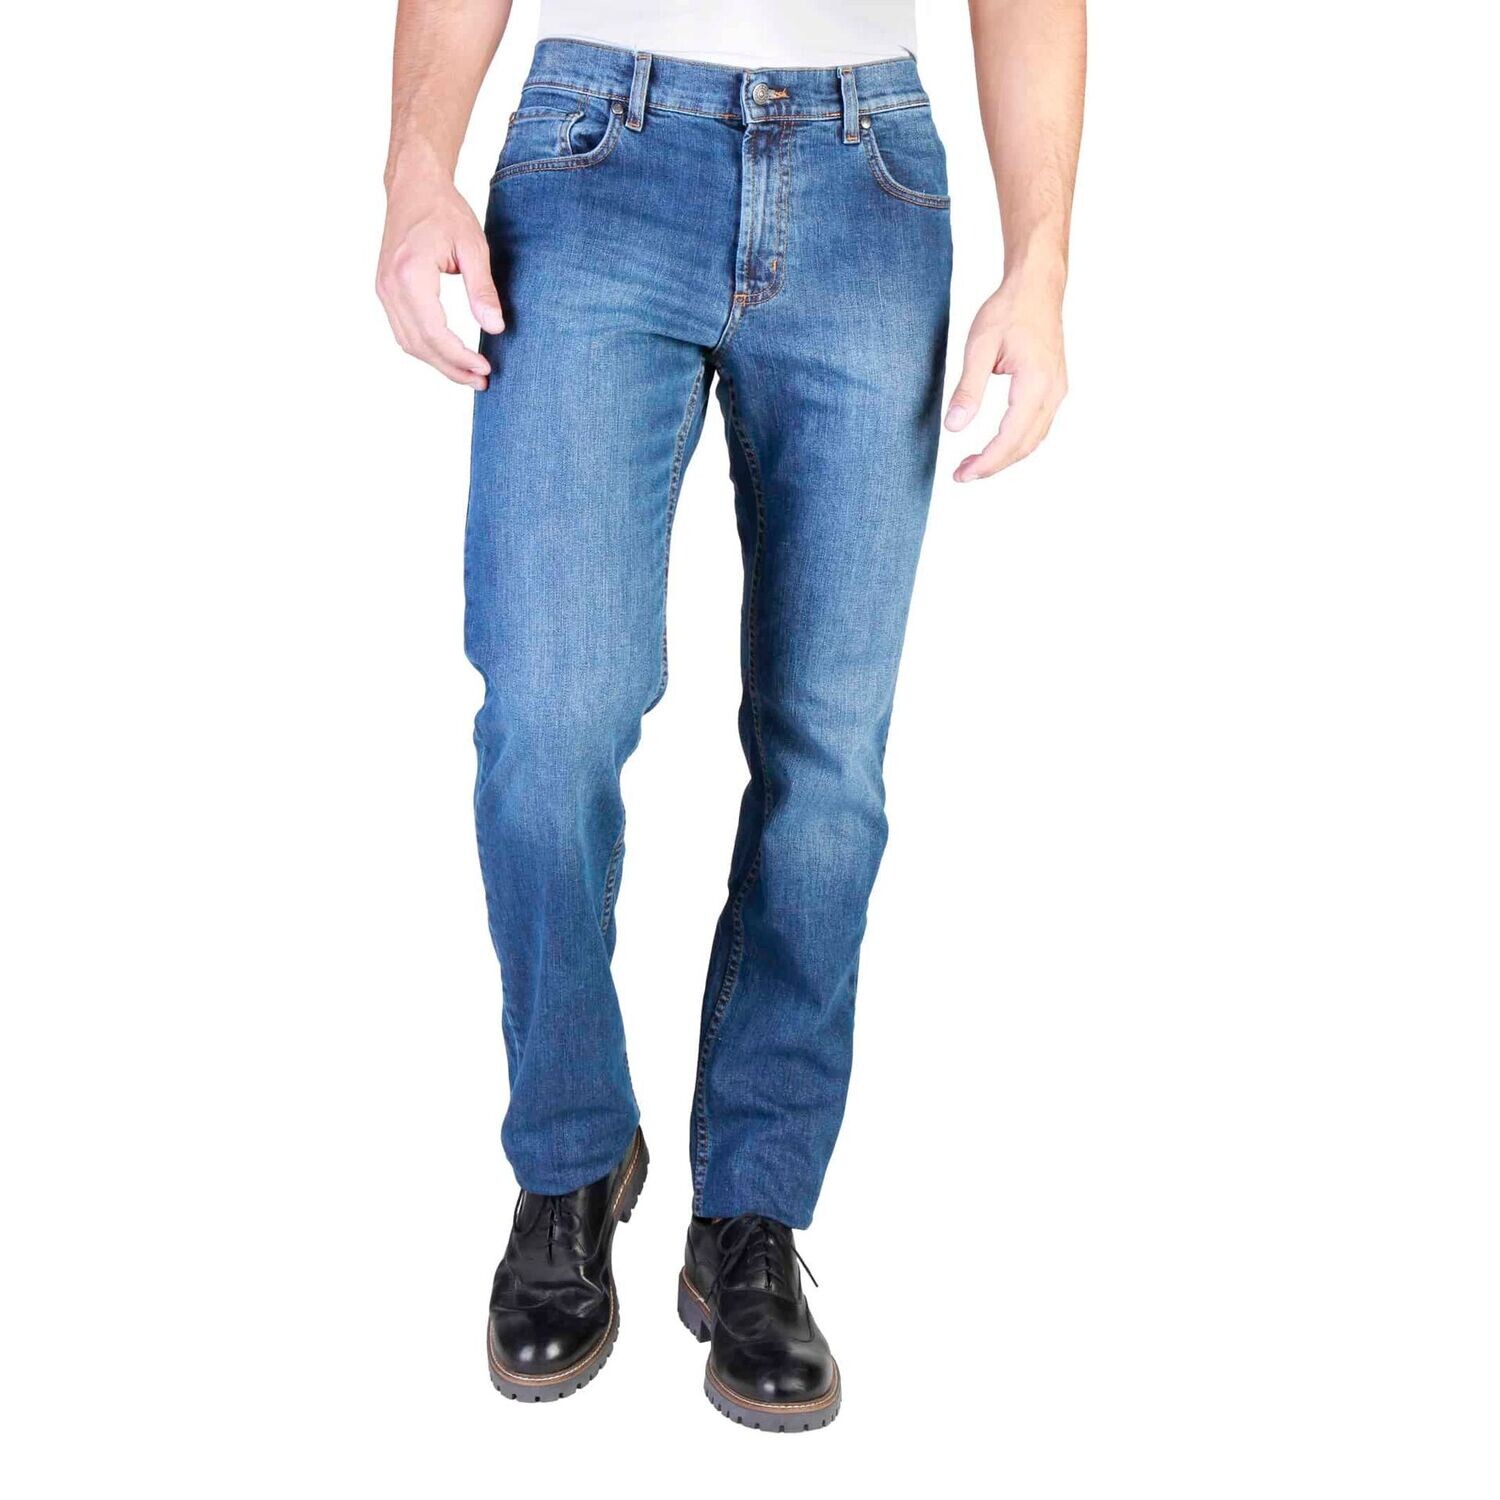 Carrera Jeans 000700_0921S, size: 46